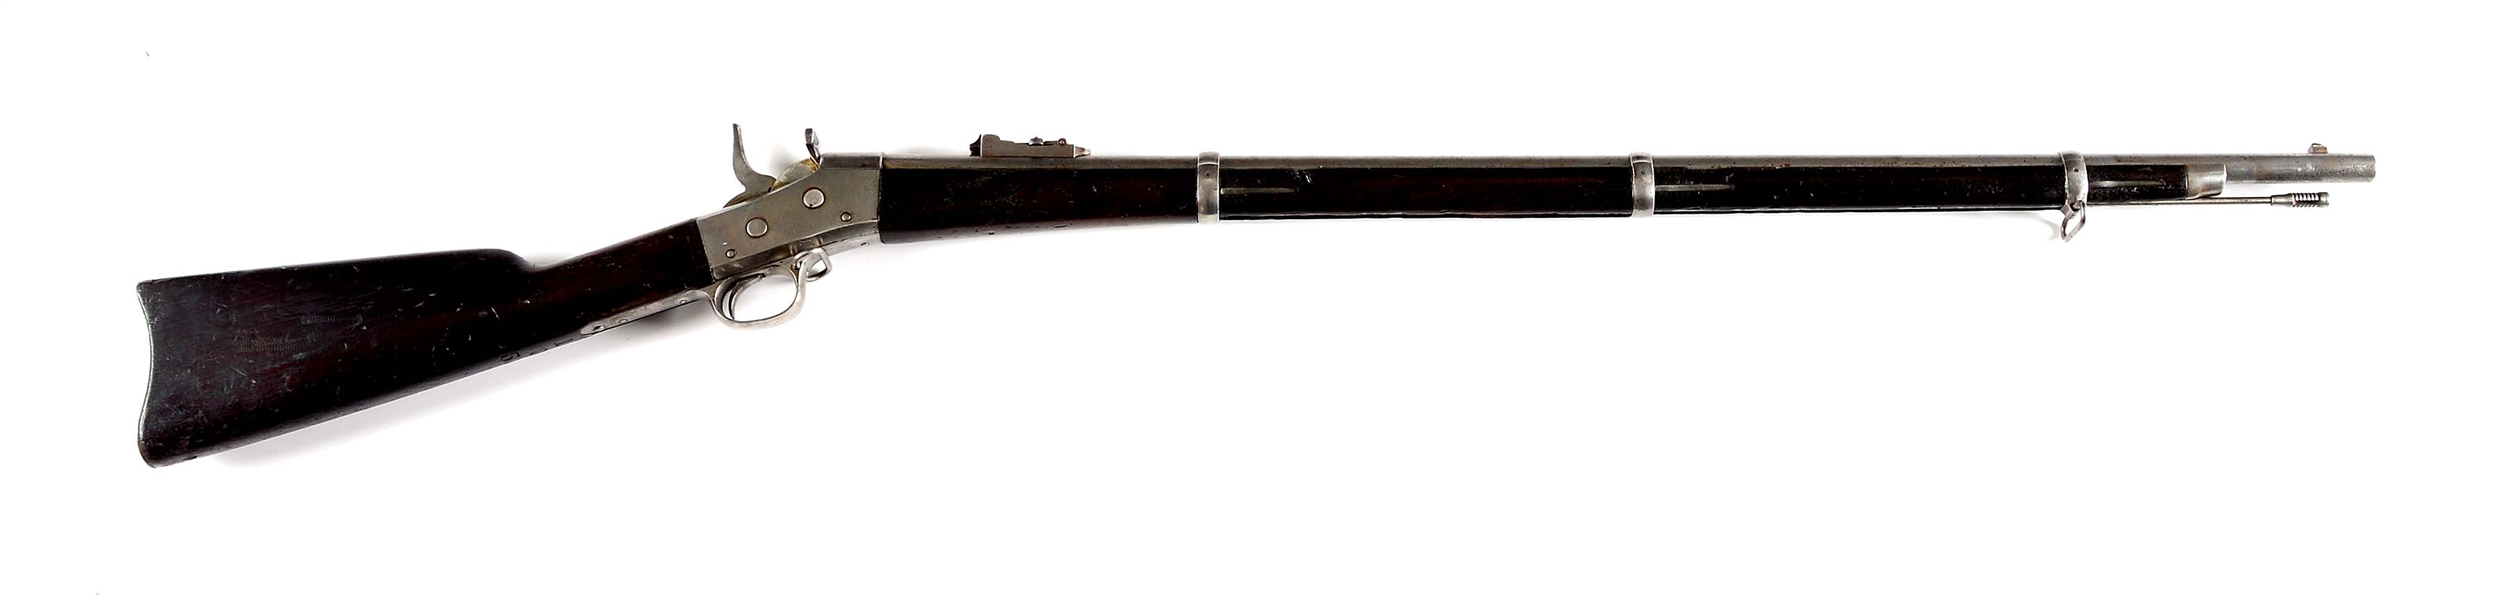 (A) NEW YORK STATE CONTRACT REMINGTON ROLLING BLOCK RIFLE.